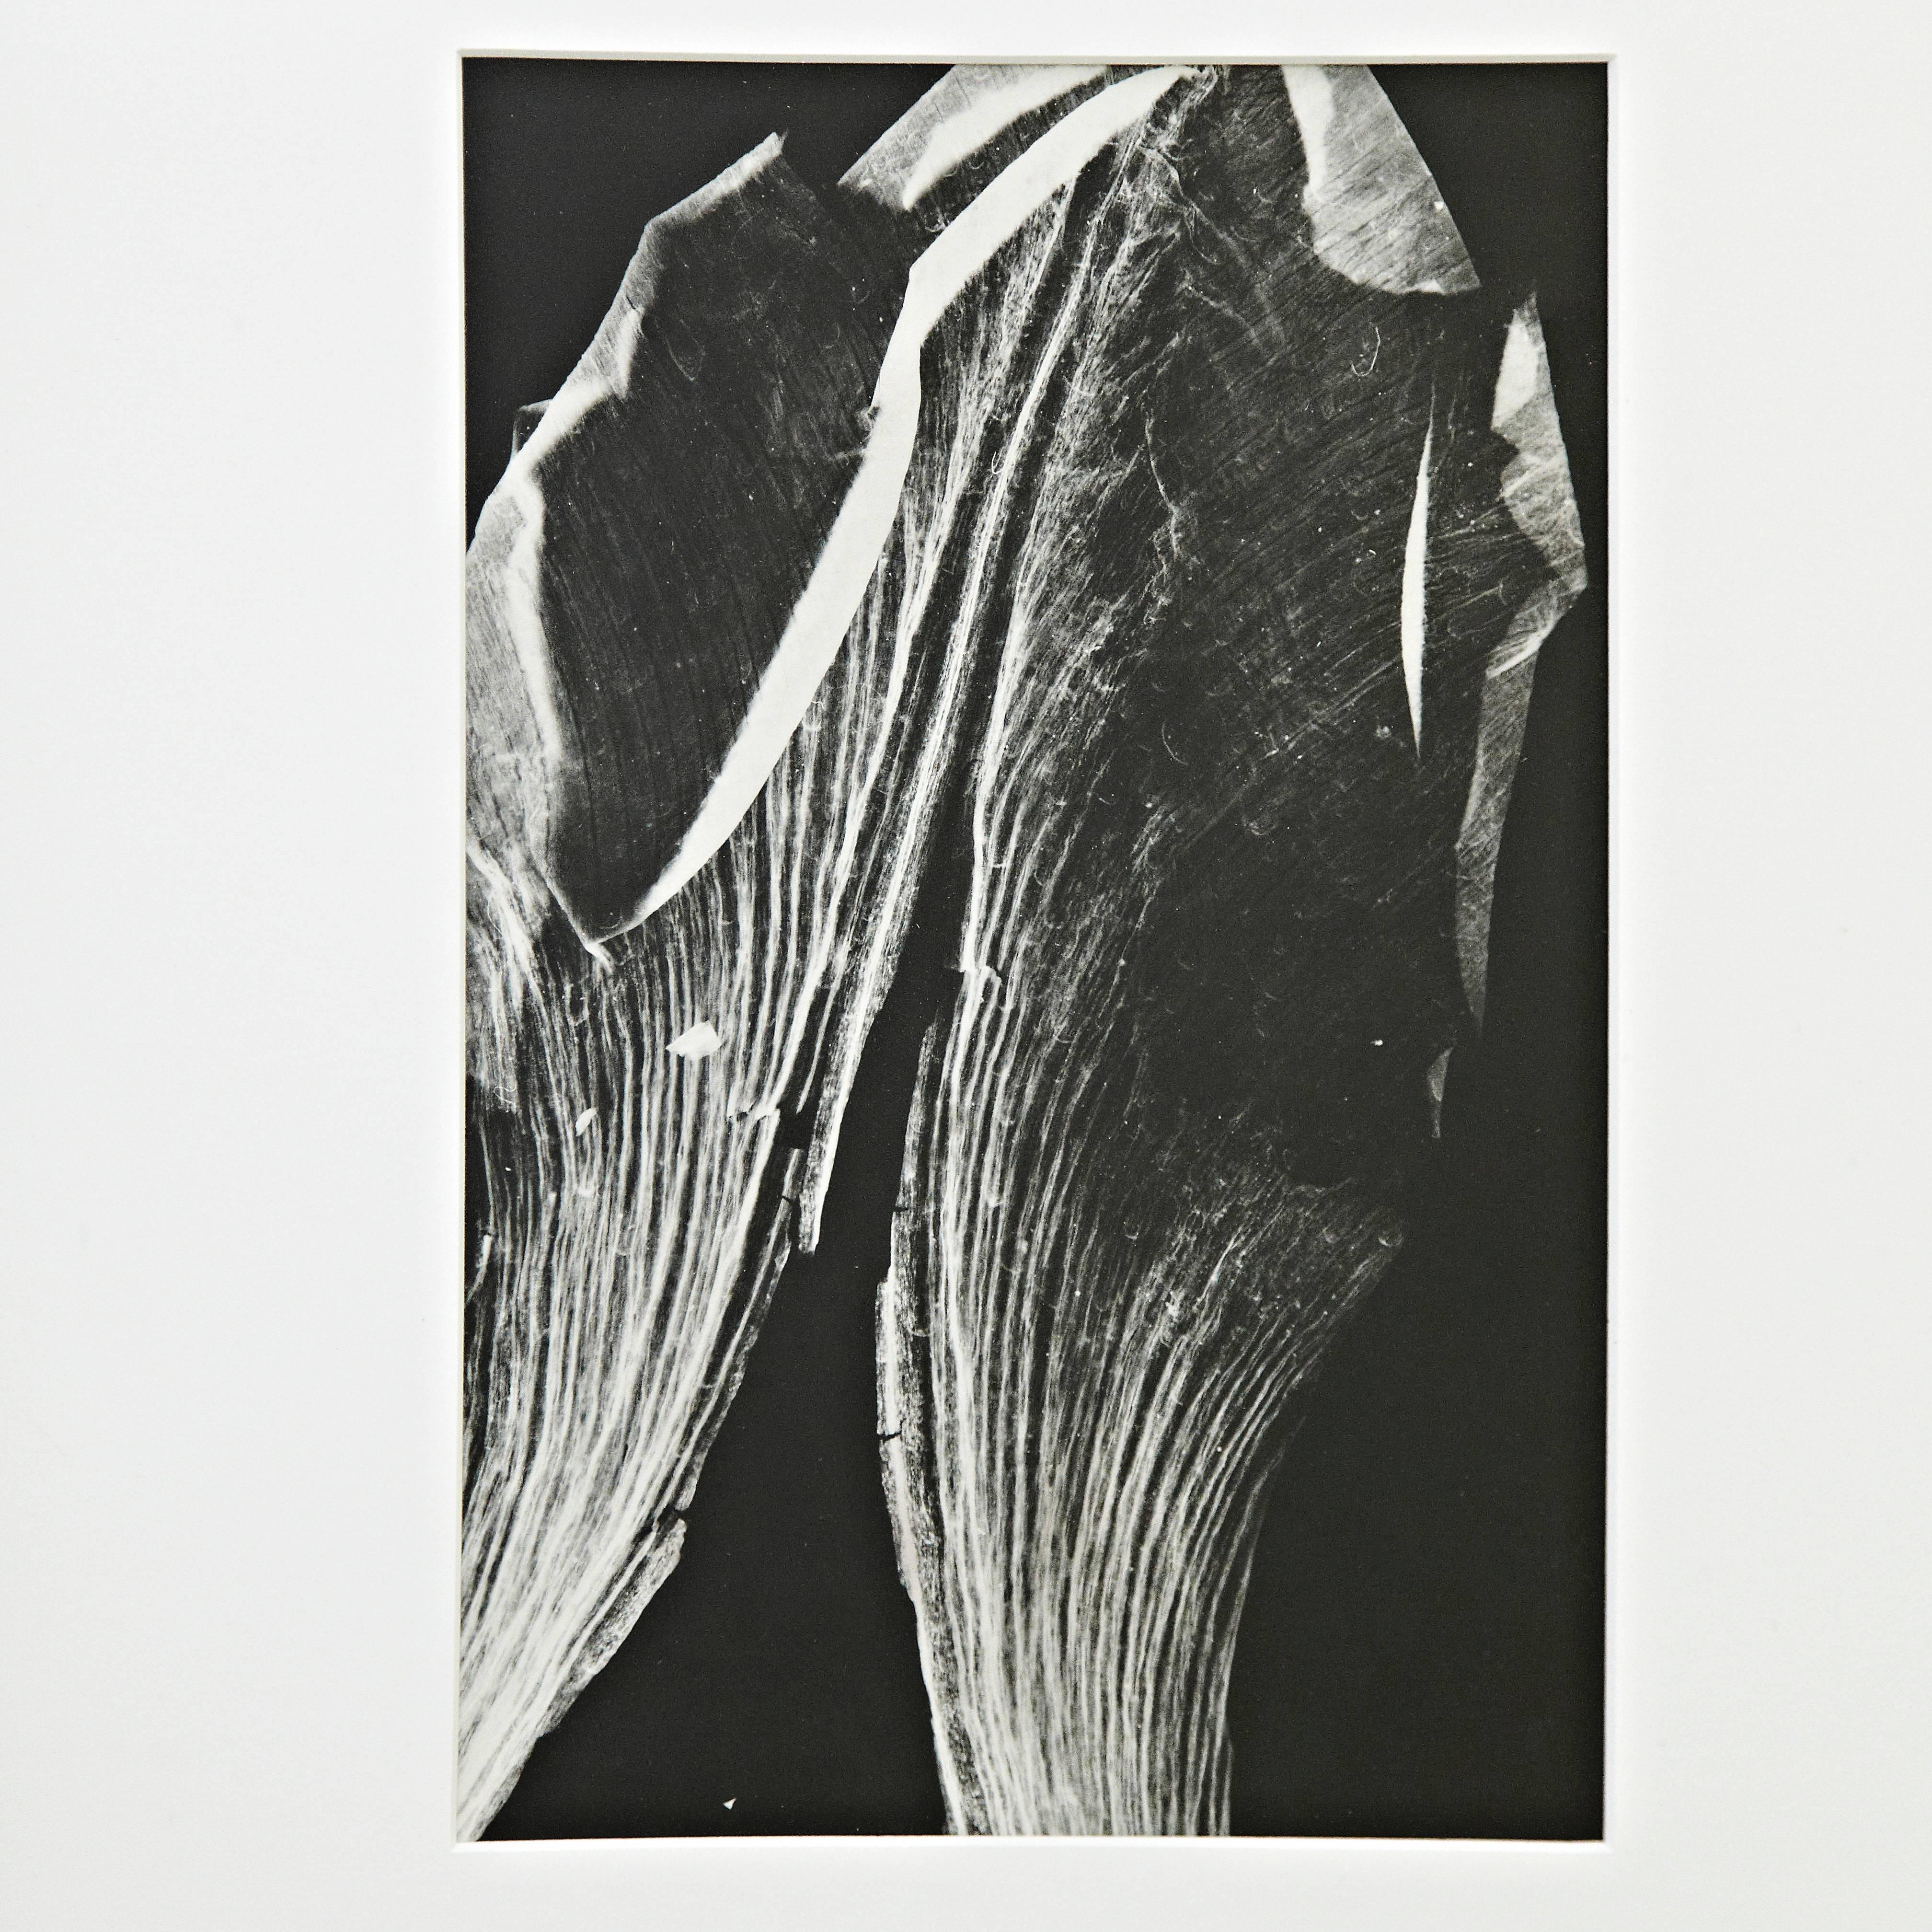 Photogram by Enrico Garzaro from the Flora serie, 2015,
with an old frame included.

